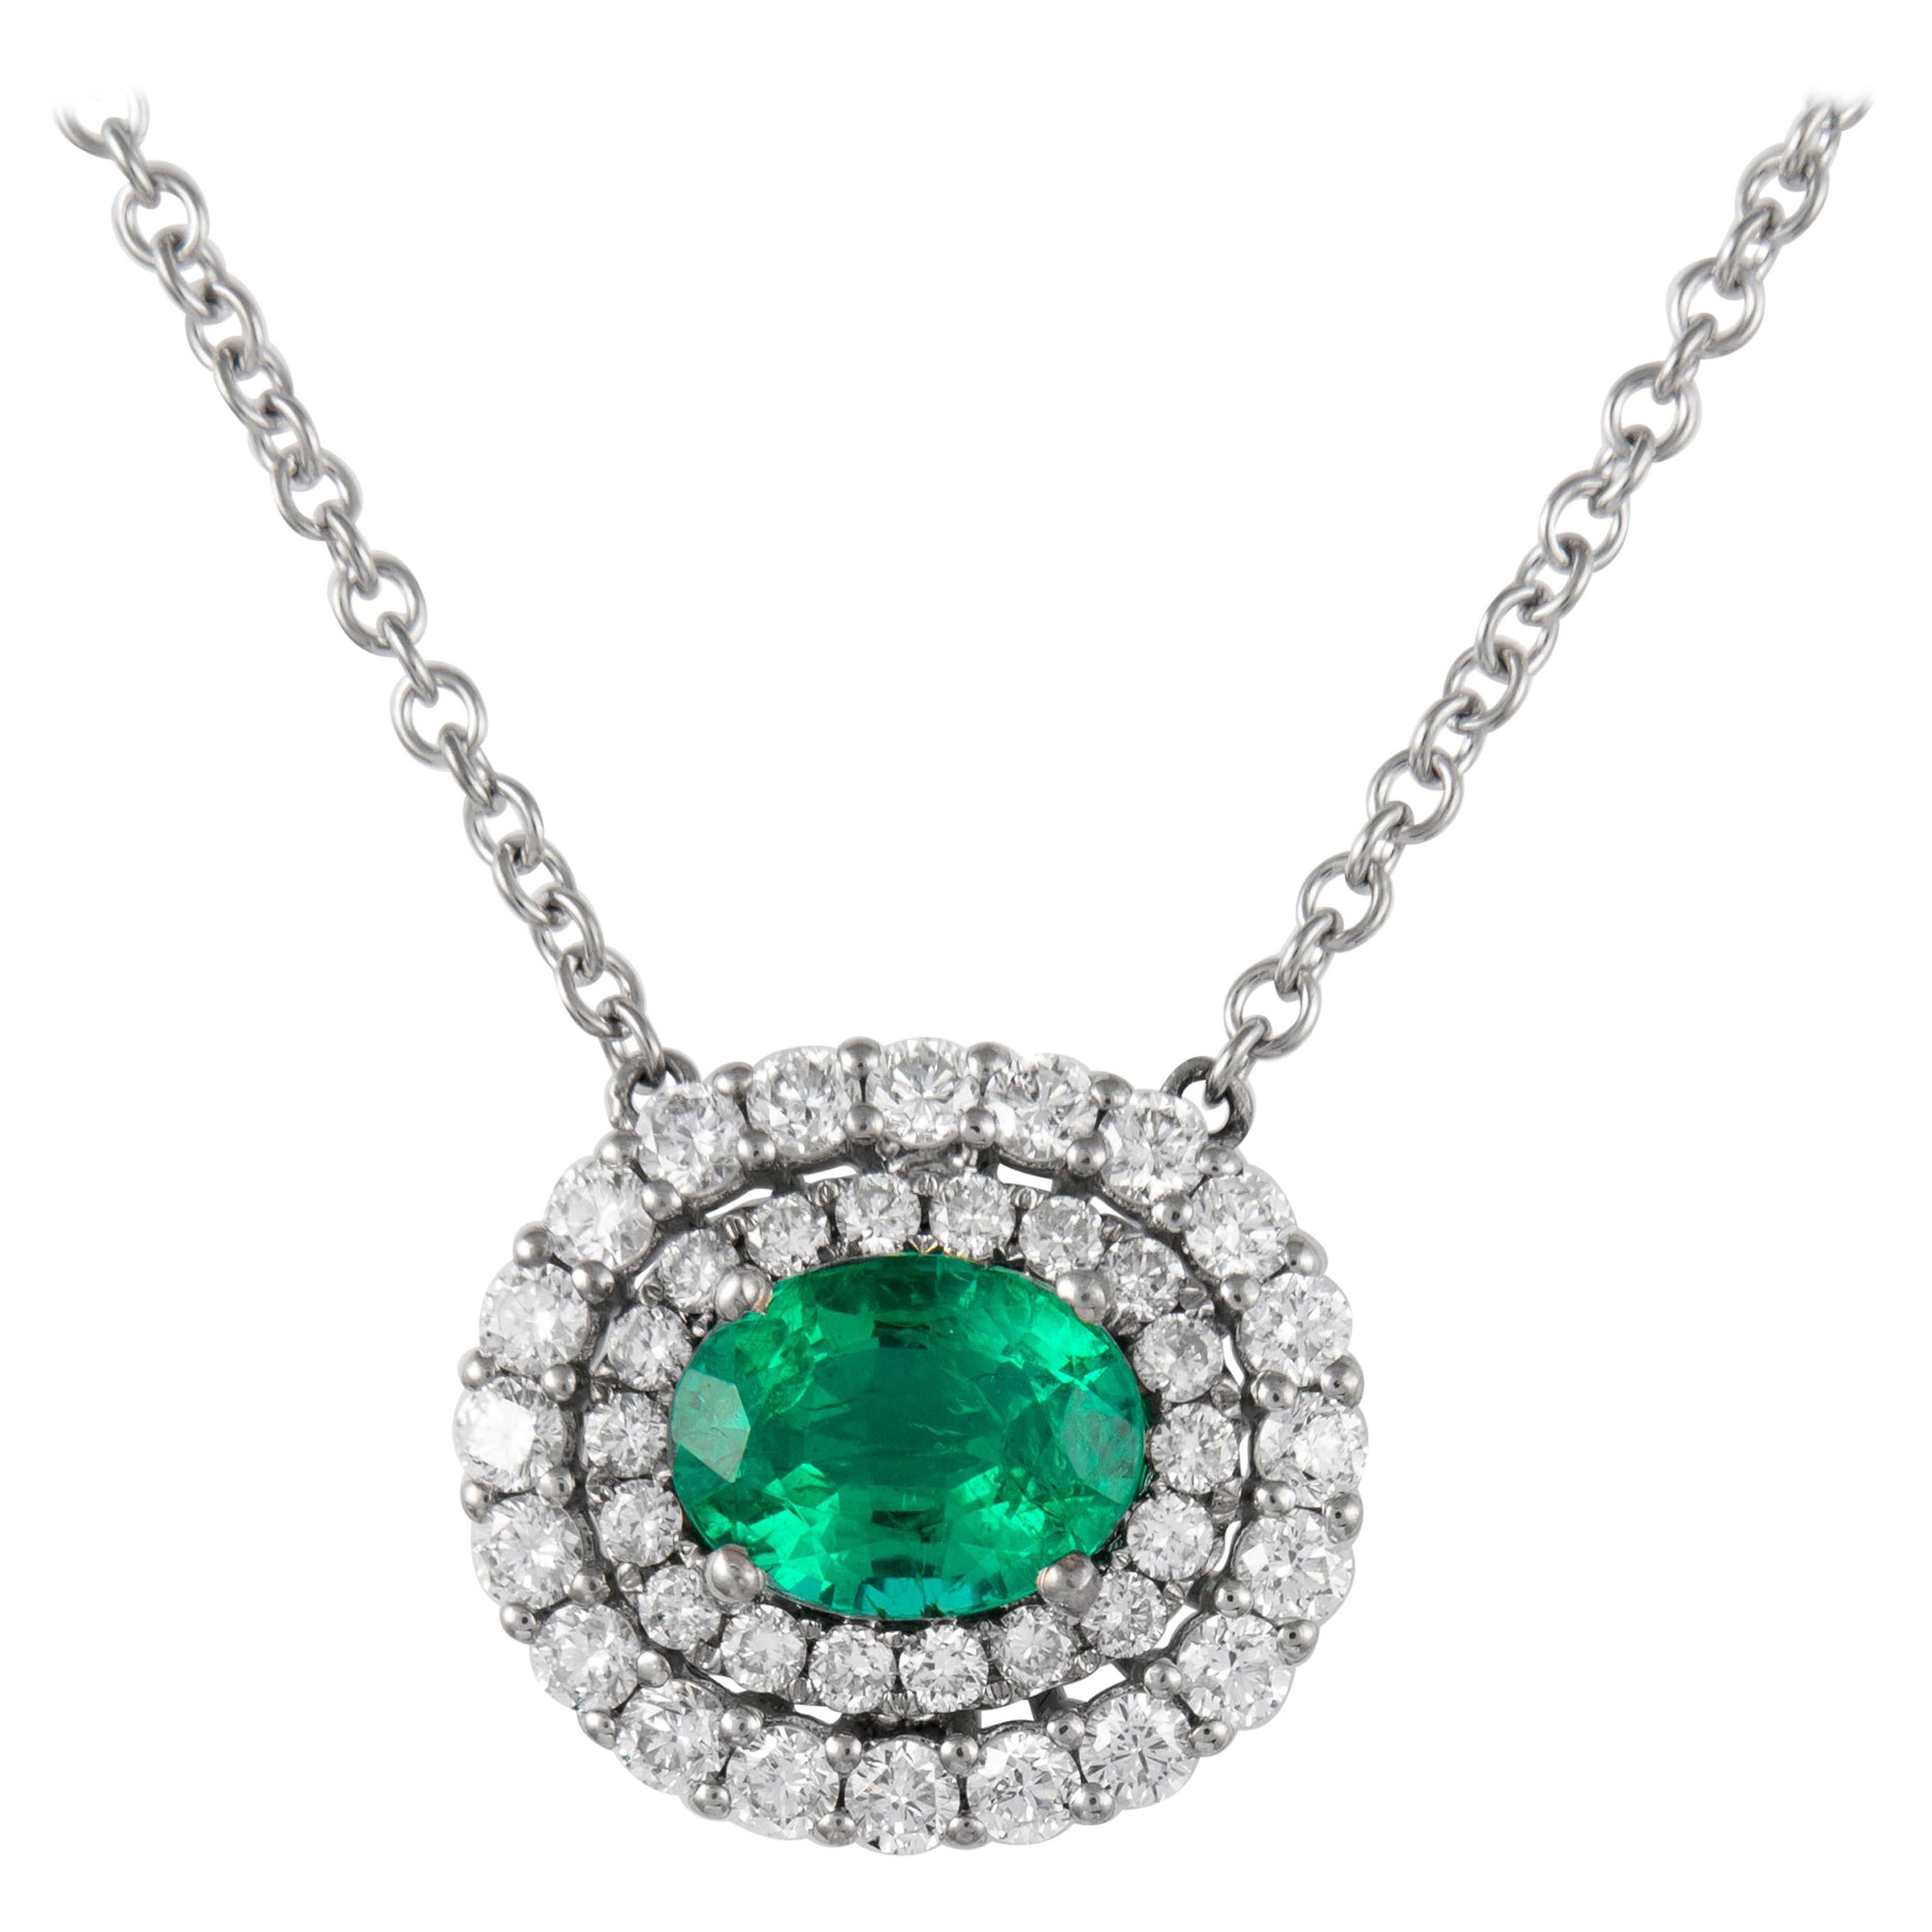 Alexander 1.79ct Oval Emerald with Diamond Halo 18k White Gold Pendant Necklace